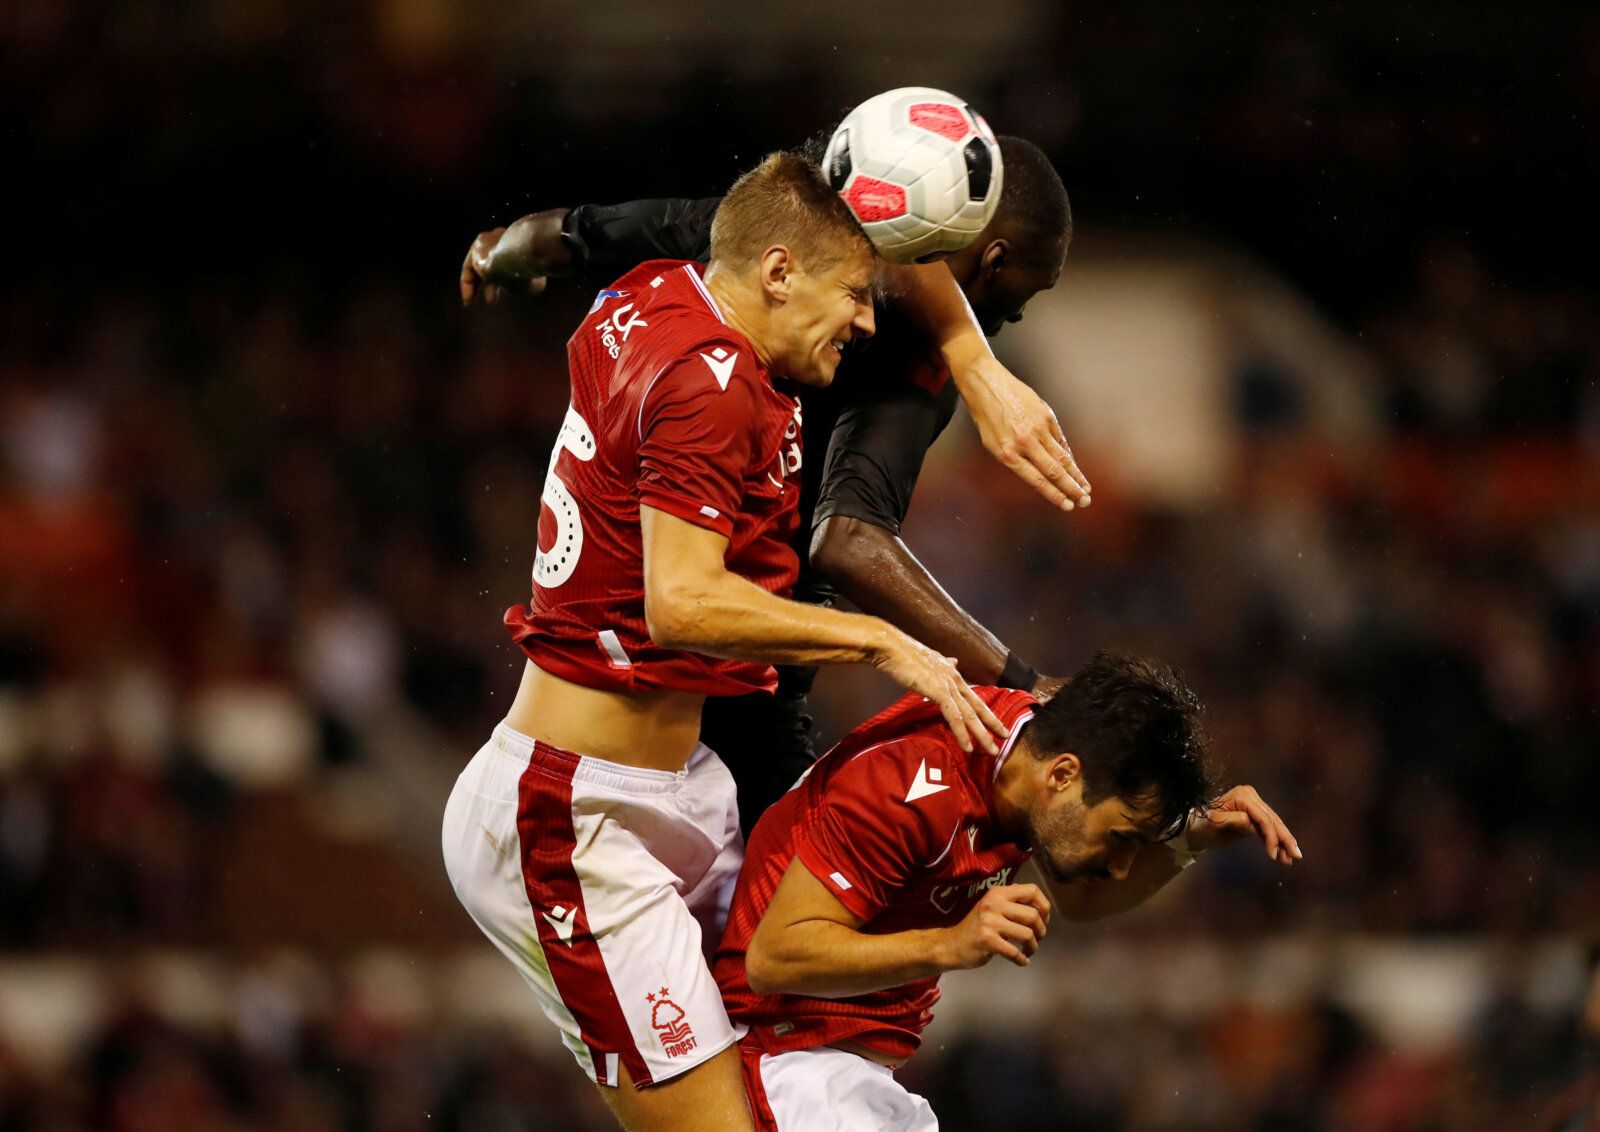 Soccer Football - Pre Season Friendly - Nottingham Forest v Crystal Palace - The City Ground, Nottingham, Britain - July 19, 2019   Nottingham Forest's Michael Dawson in action with Crystal Palace's Christian Benteke      Action Images via Reuters/Andrew Boyers